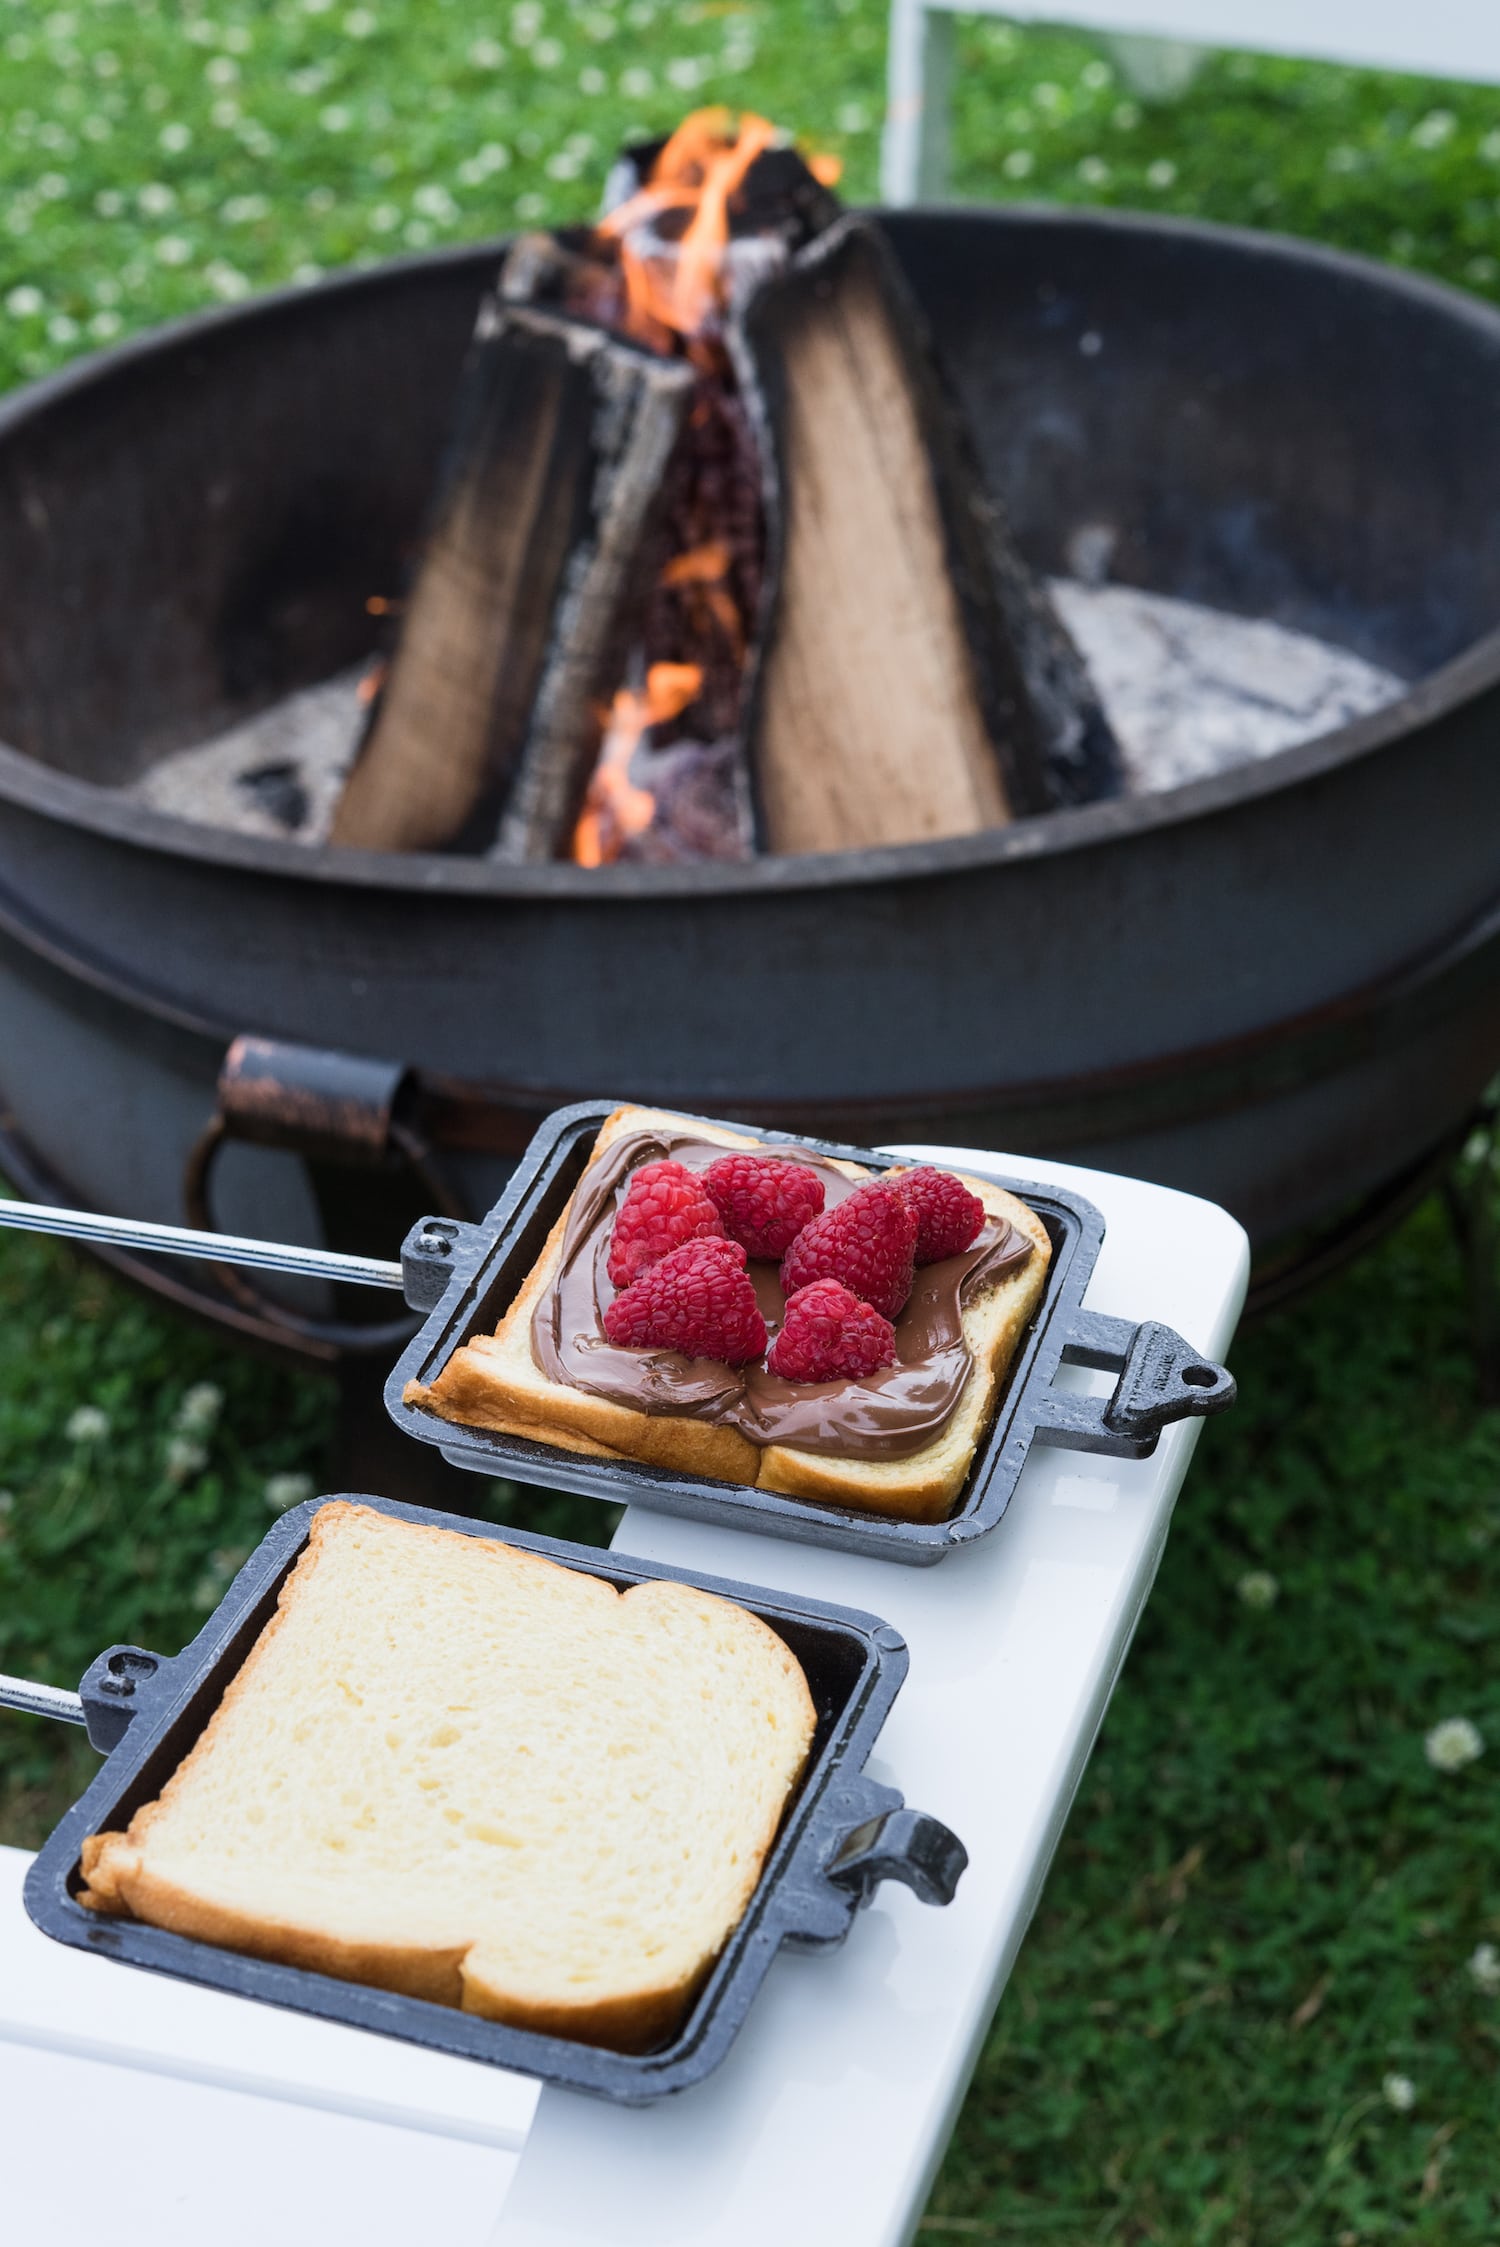 Best Camping Recipes! Raspberry Nutella mountain pies from entertaining blog @cydconverse